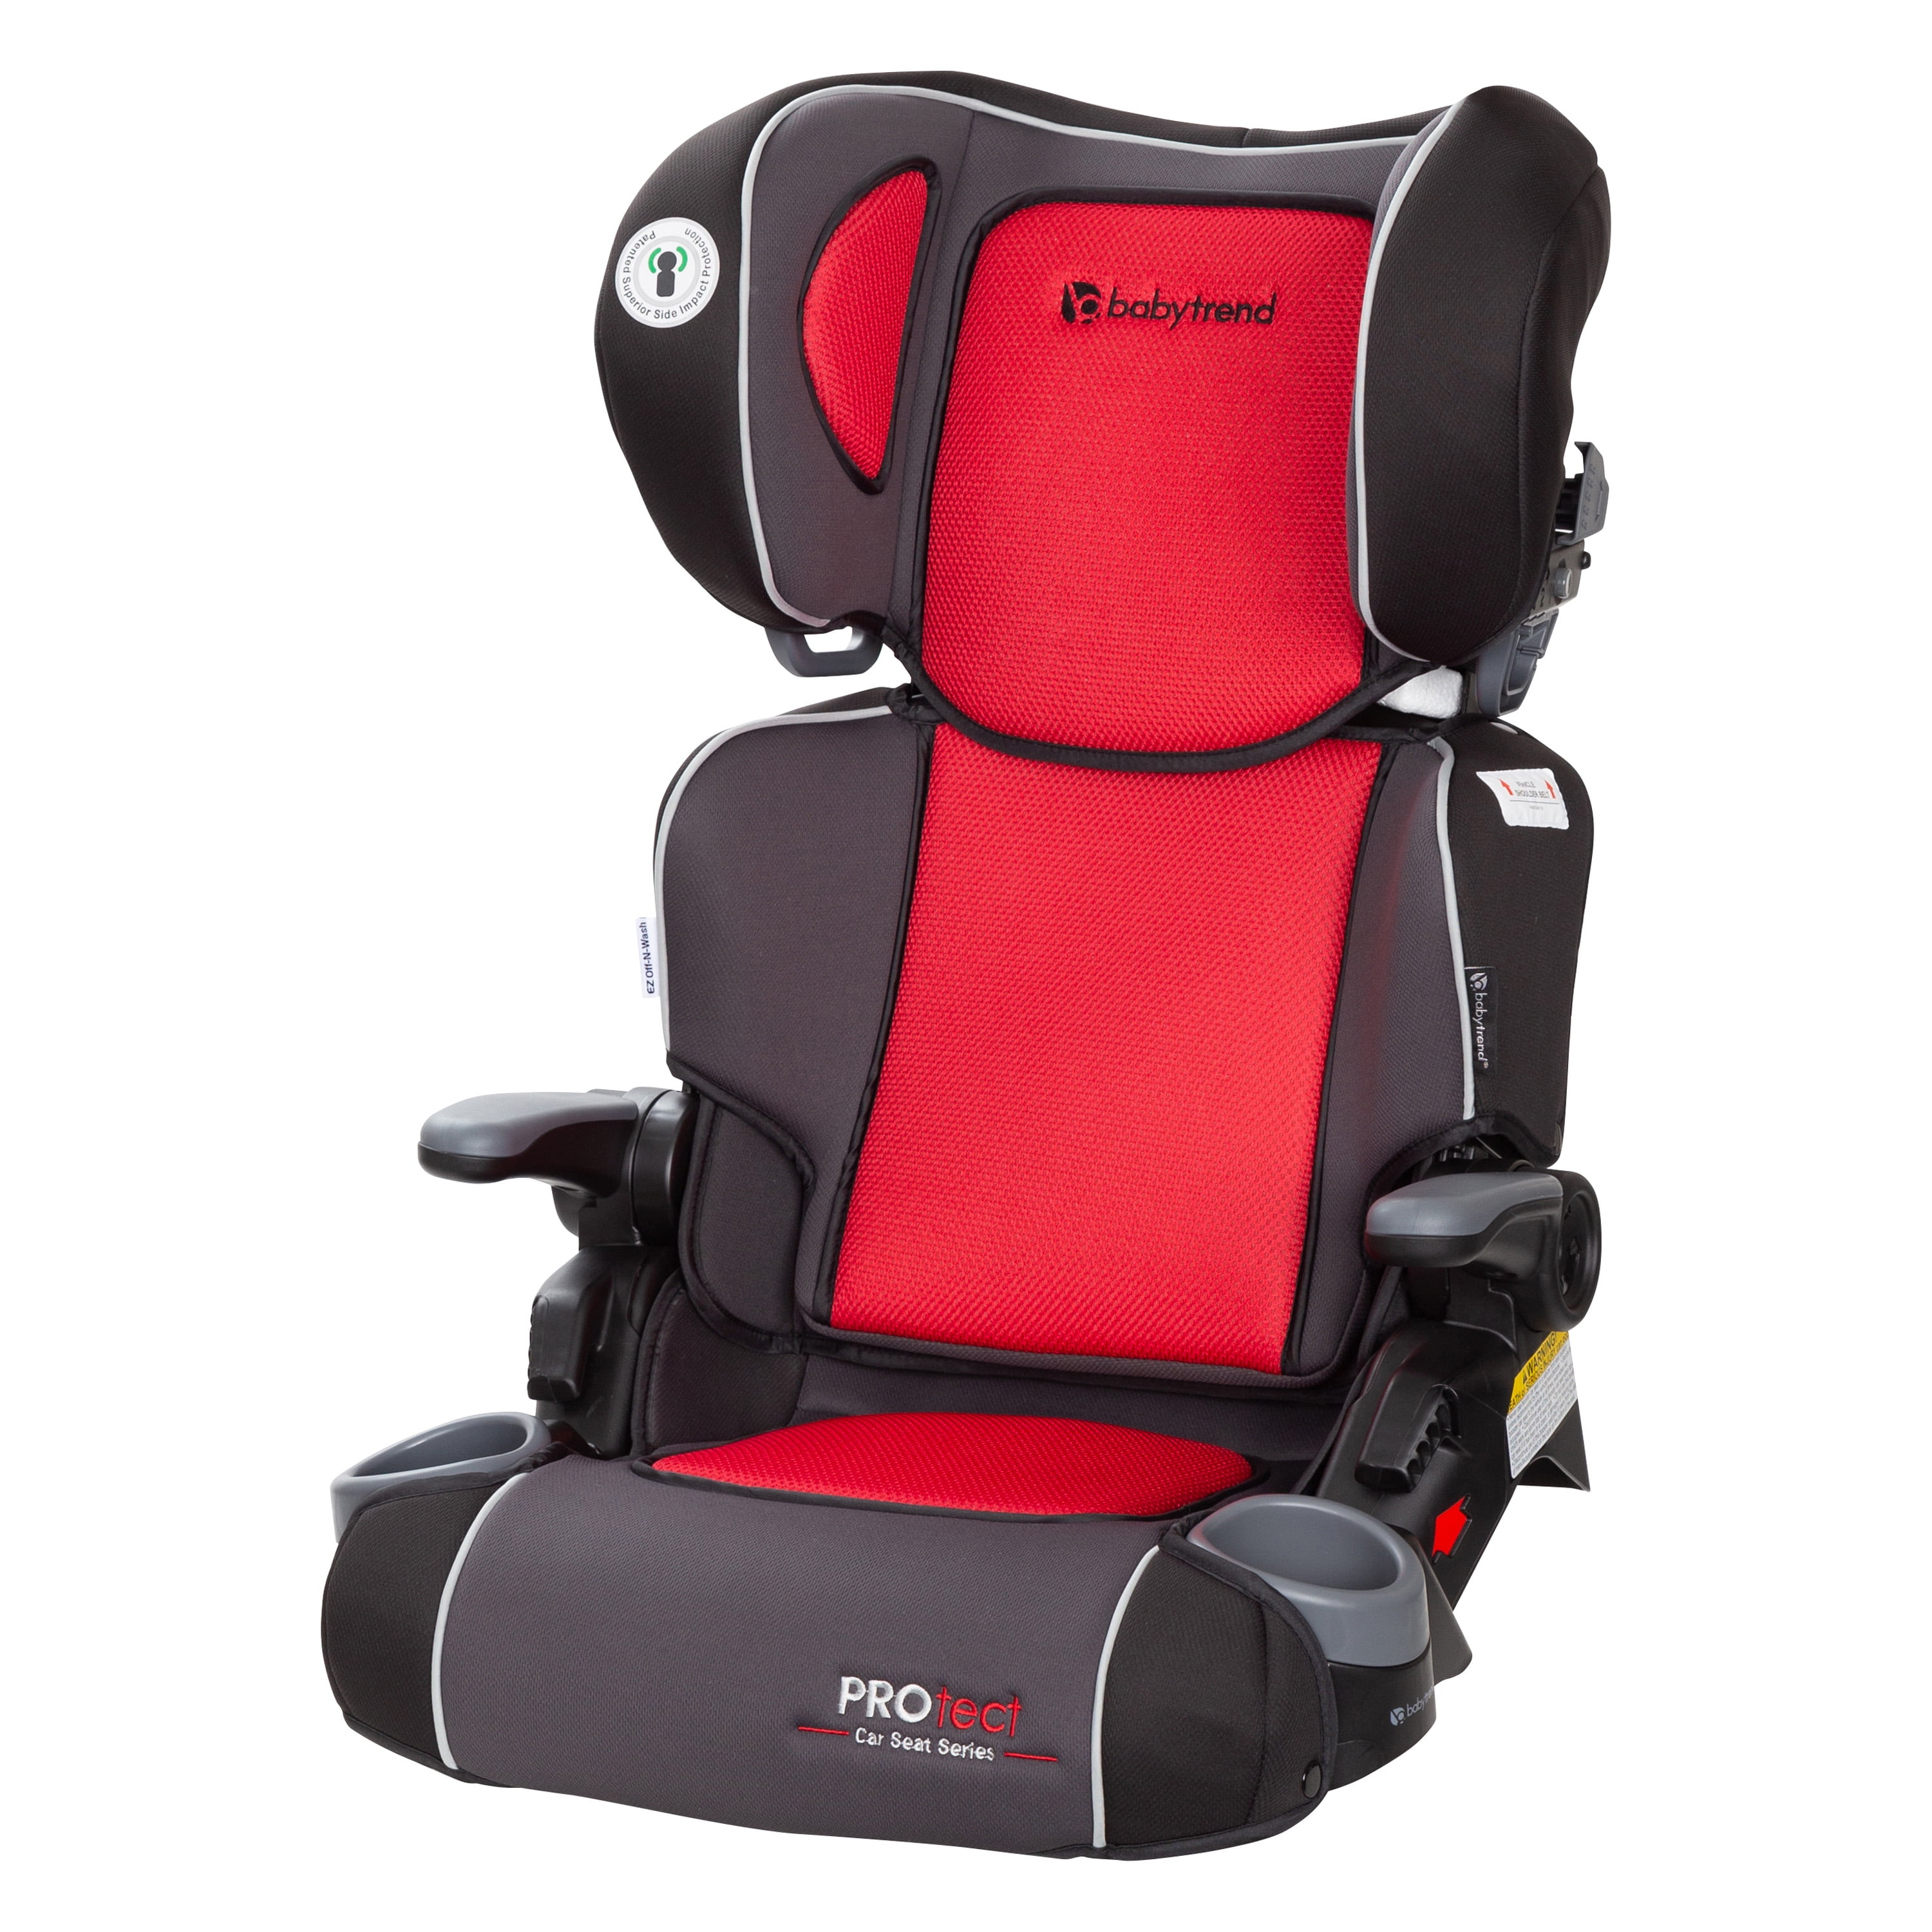 What S The Best Travel Booster Car Seat, Travel Booster Car Seat For 4 Year Old